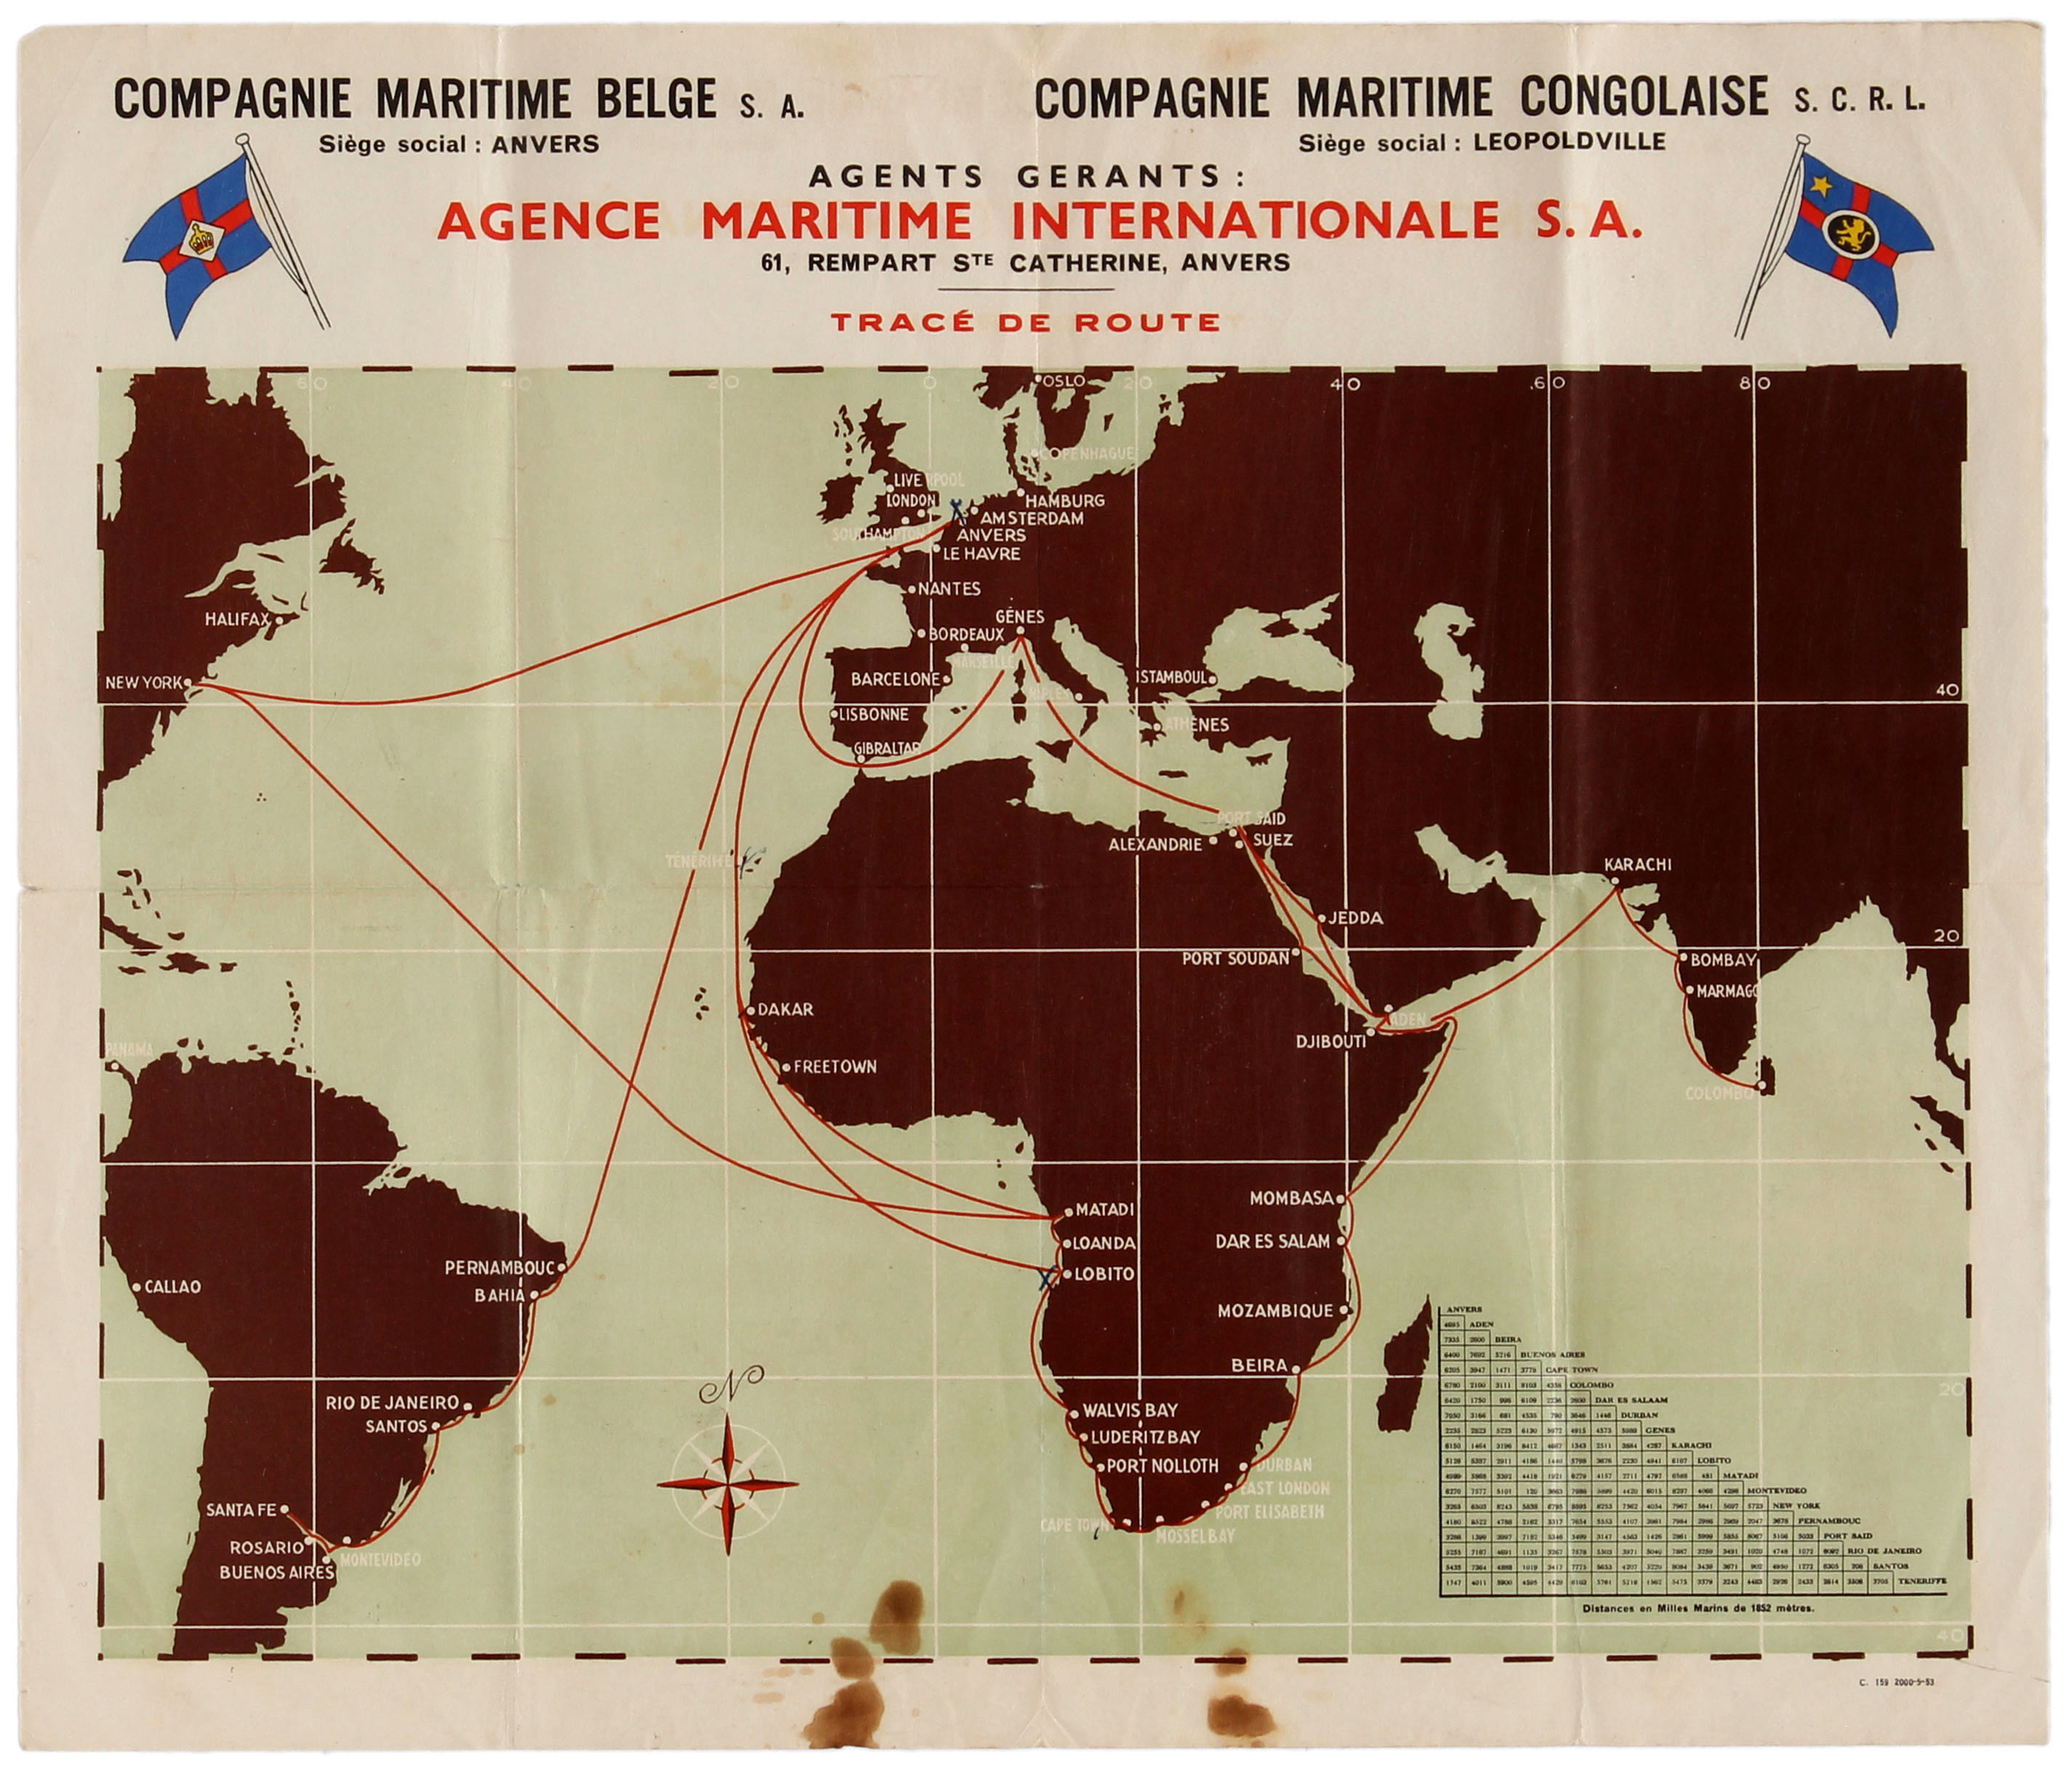 Travel Poster Compagnie Maritime Belge Congolaise Route Map Shipping